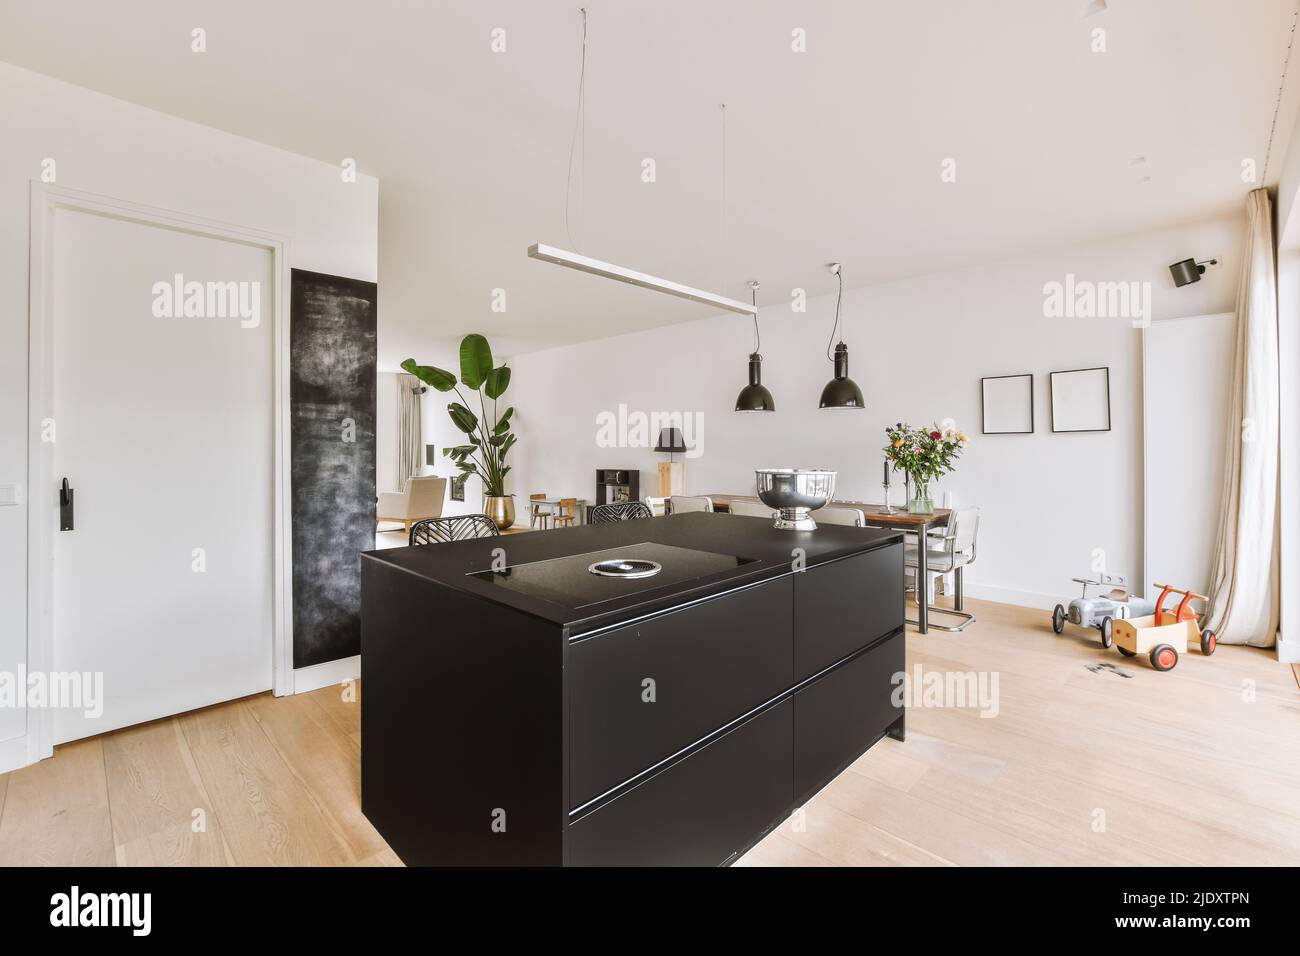 Open plan kitchen design with black countertops and an island in the middle under the lampitchen with island counter Stock Photo